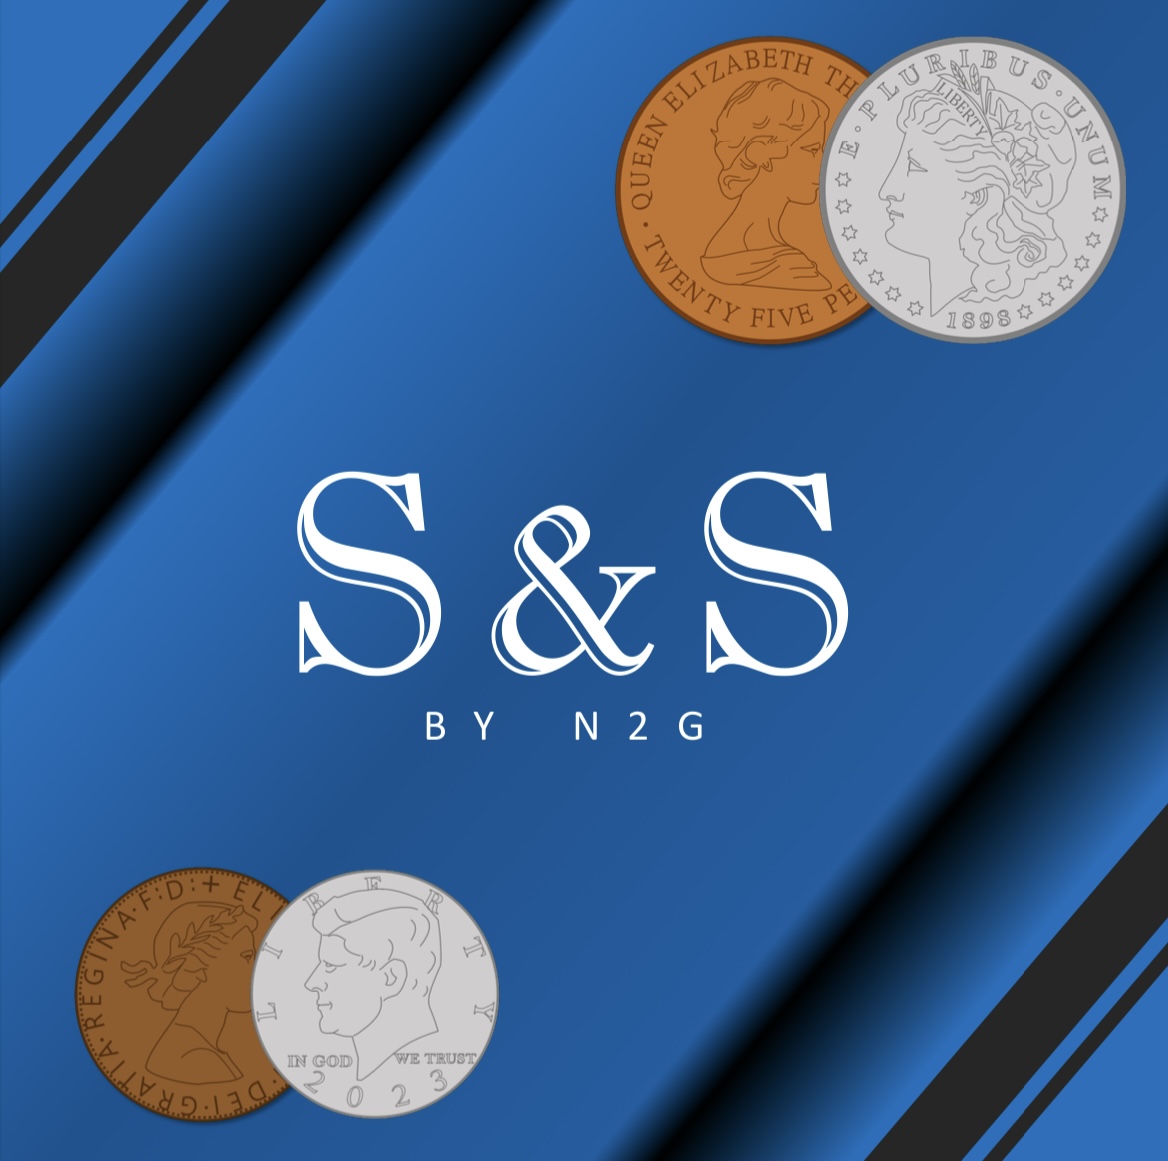 S & S By N2G